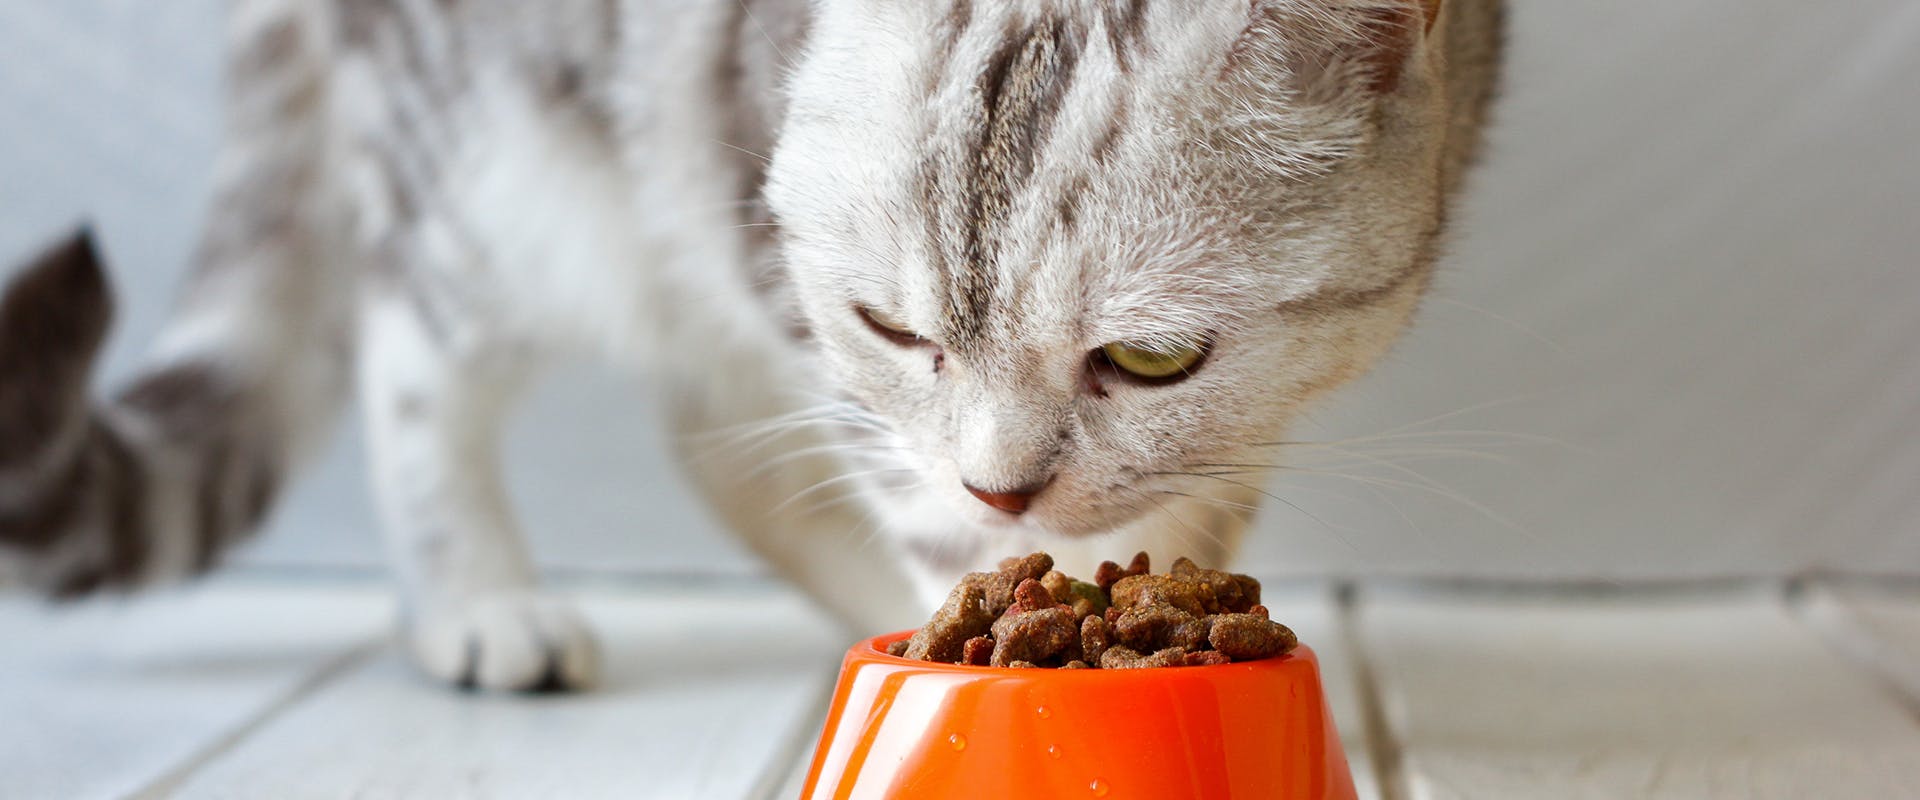 A cat eating a bowl of healthy dry cat food